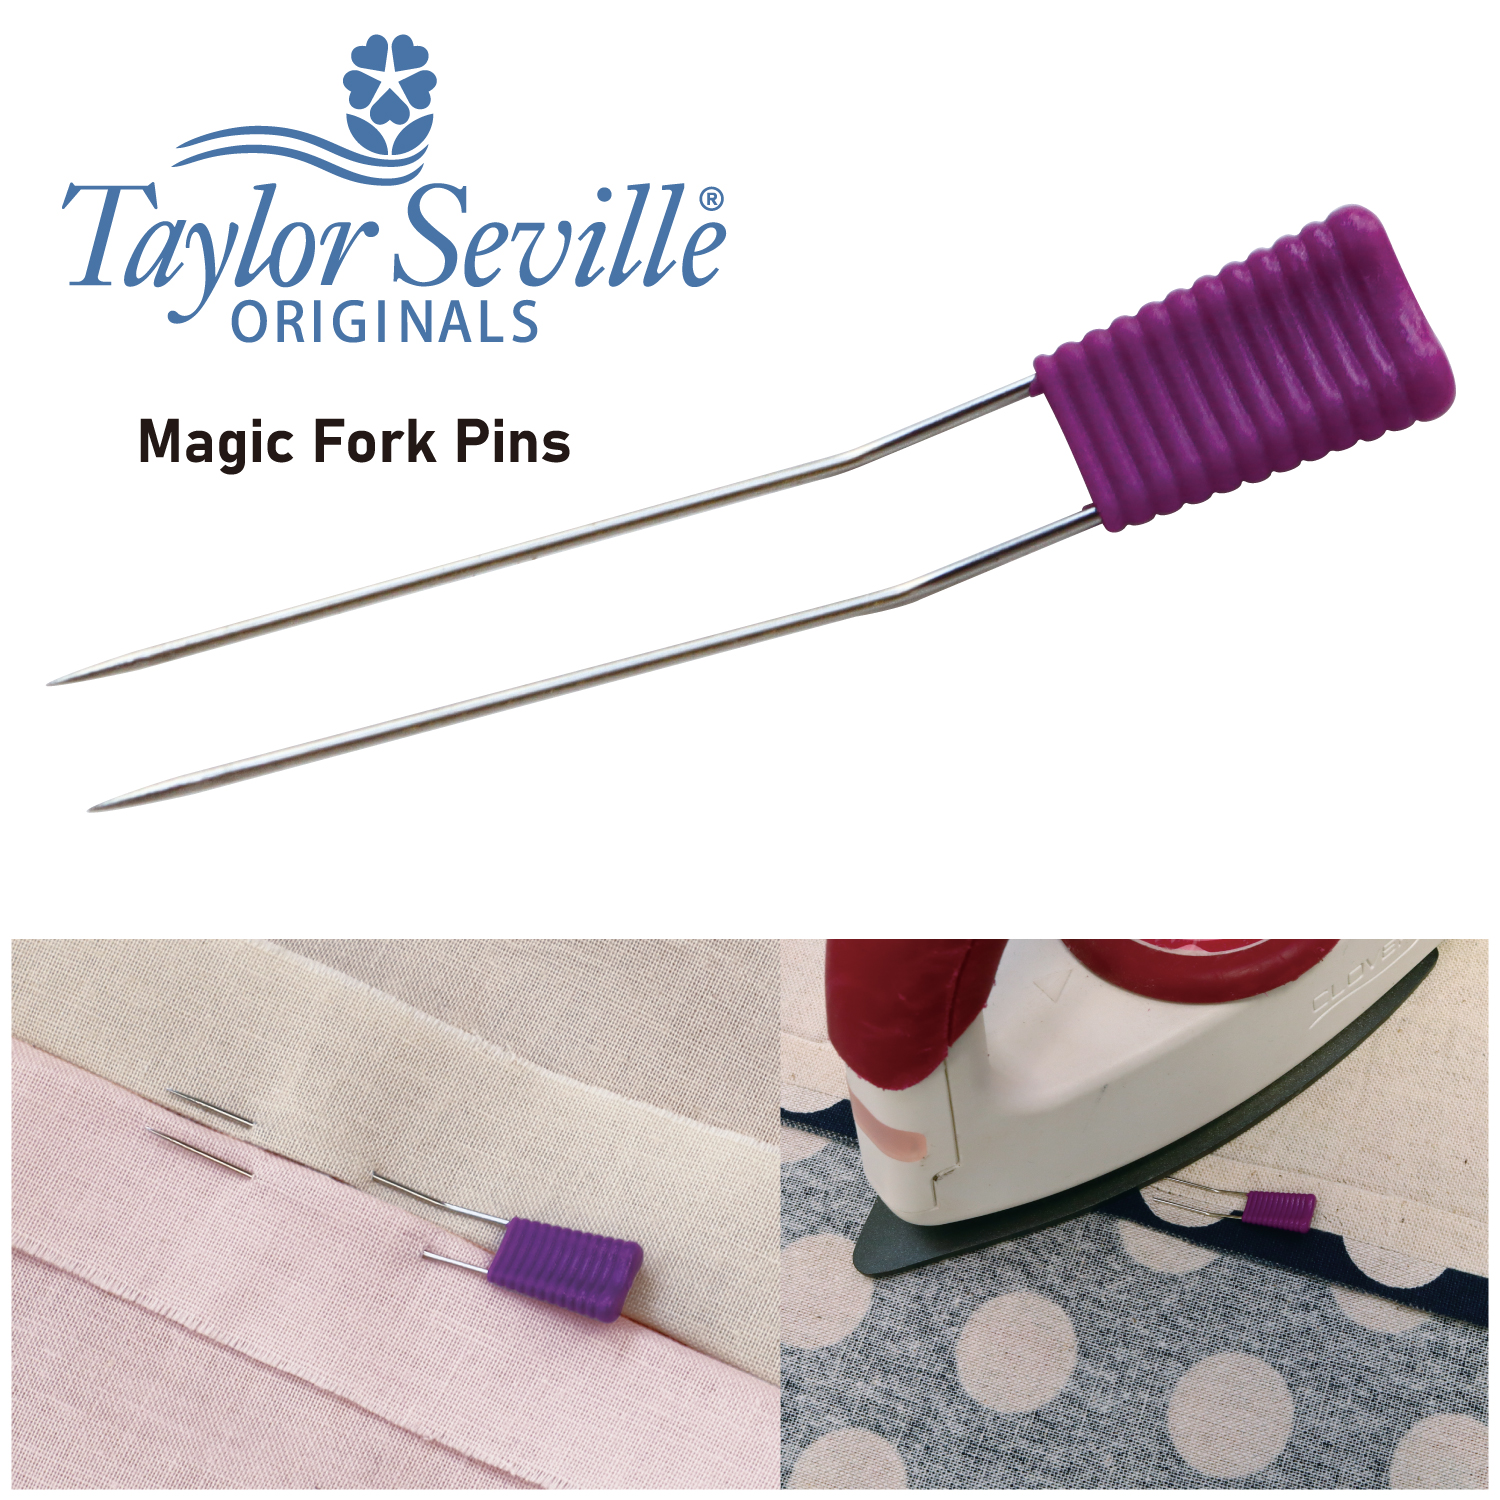 TY-04140 Taylor Seville Magic Fork Pin with Case (pcs)